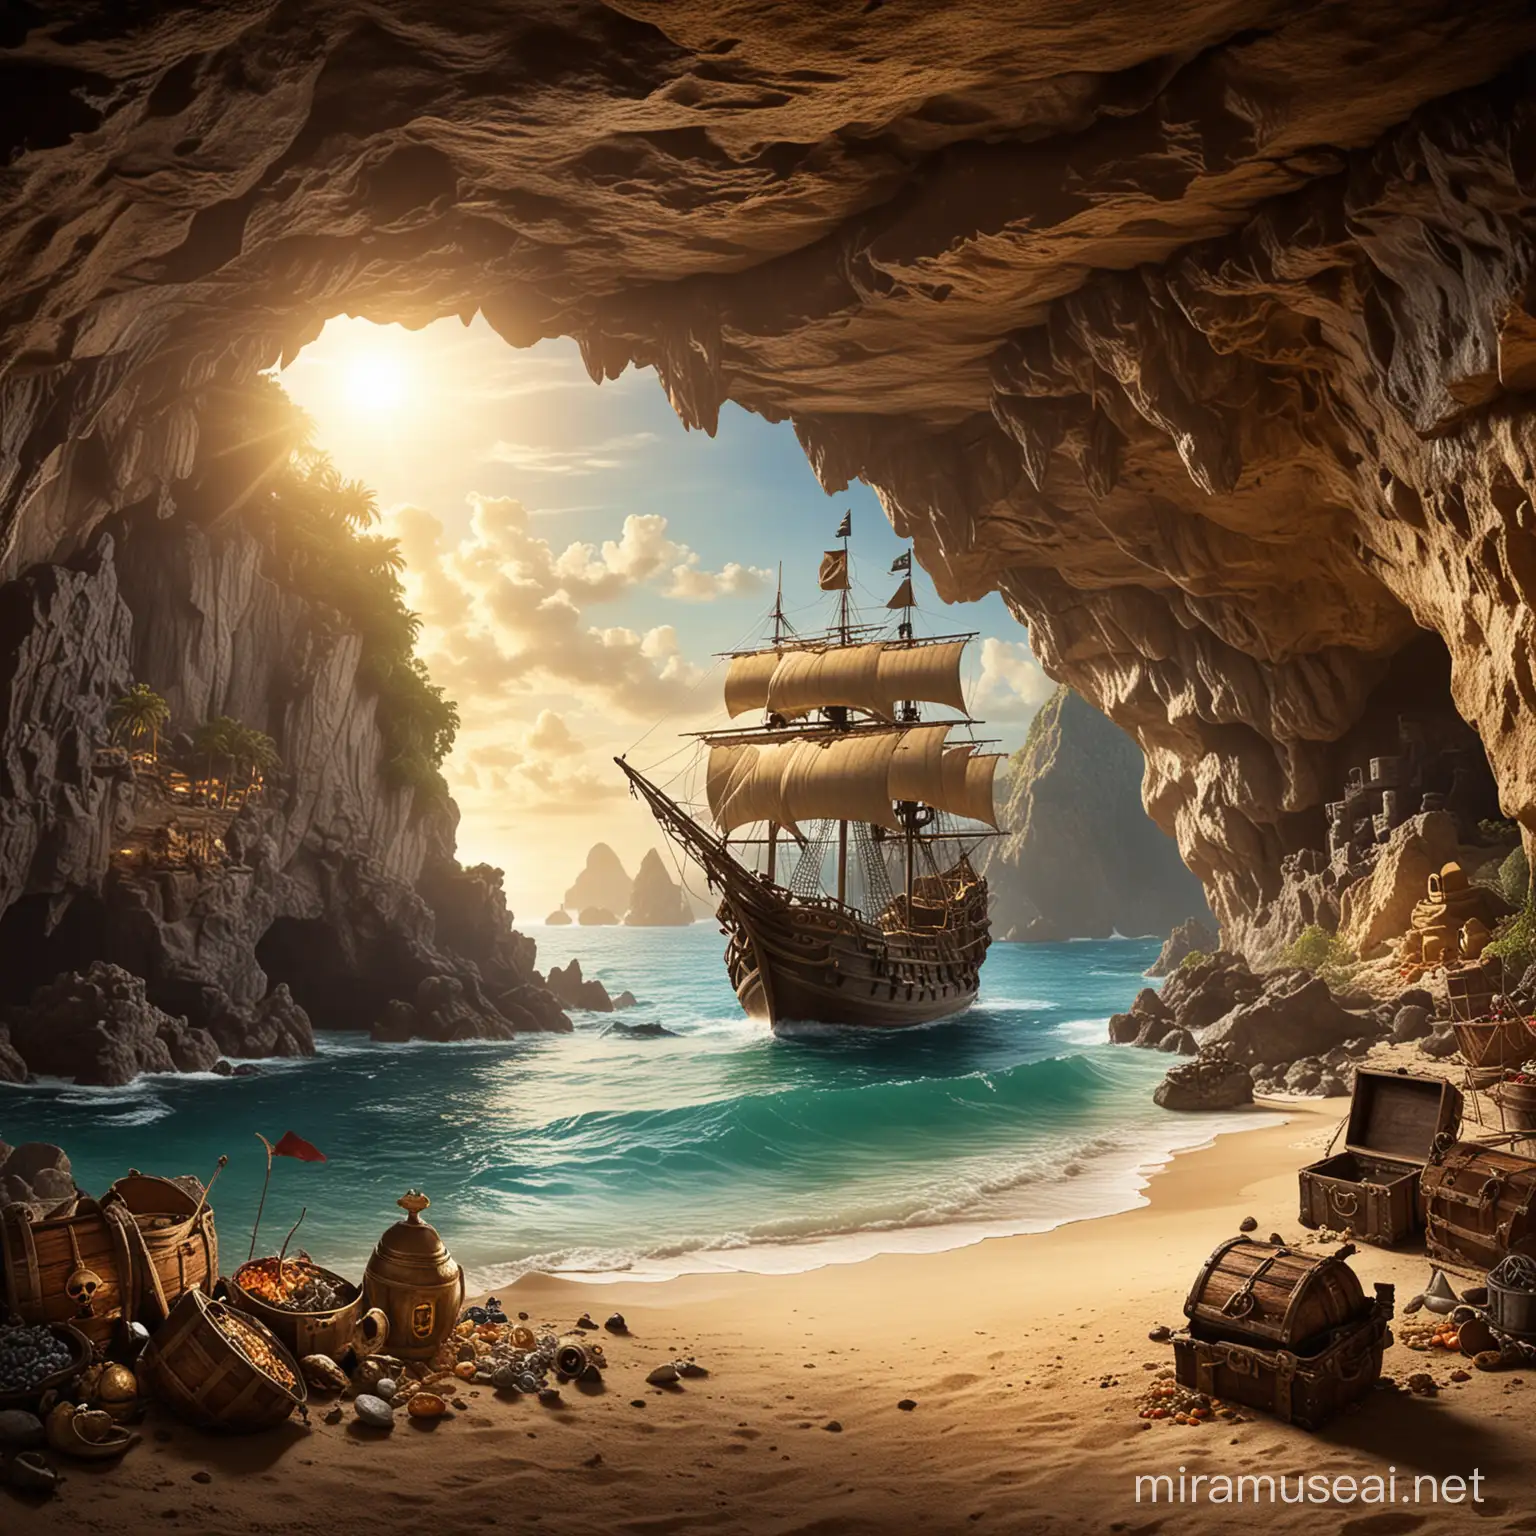 background photo cave pirate treasure pirate ship in the background